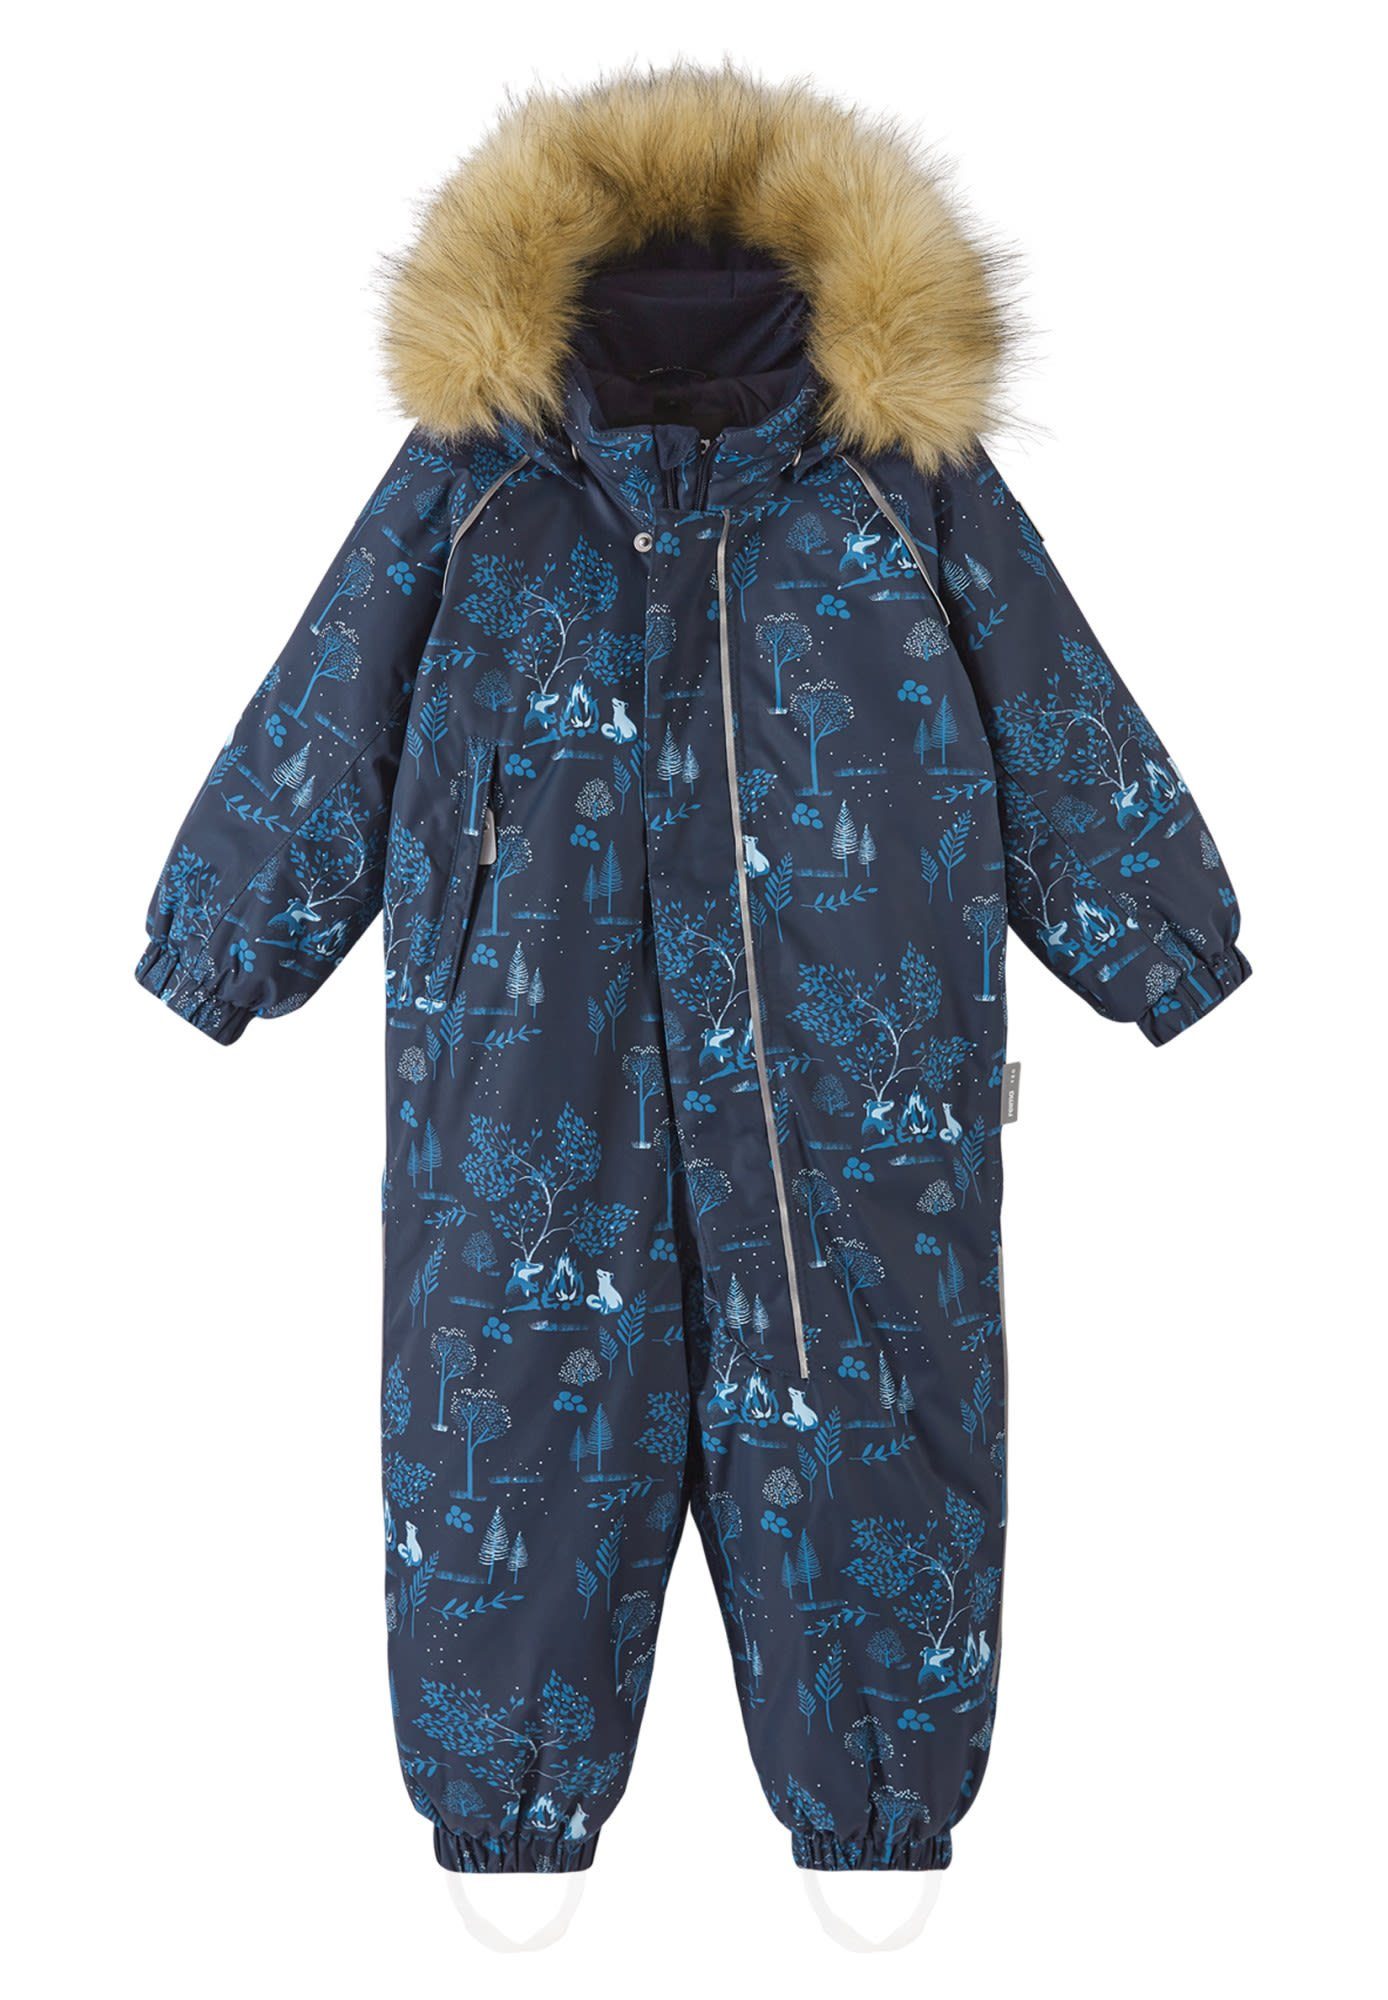 Navy Reima Kinder Winter Lappi reima Overall Overall Toddlers